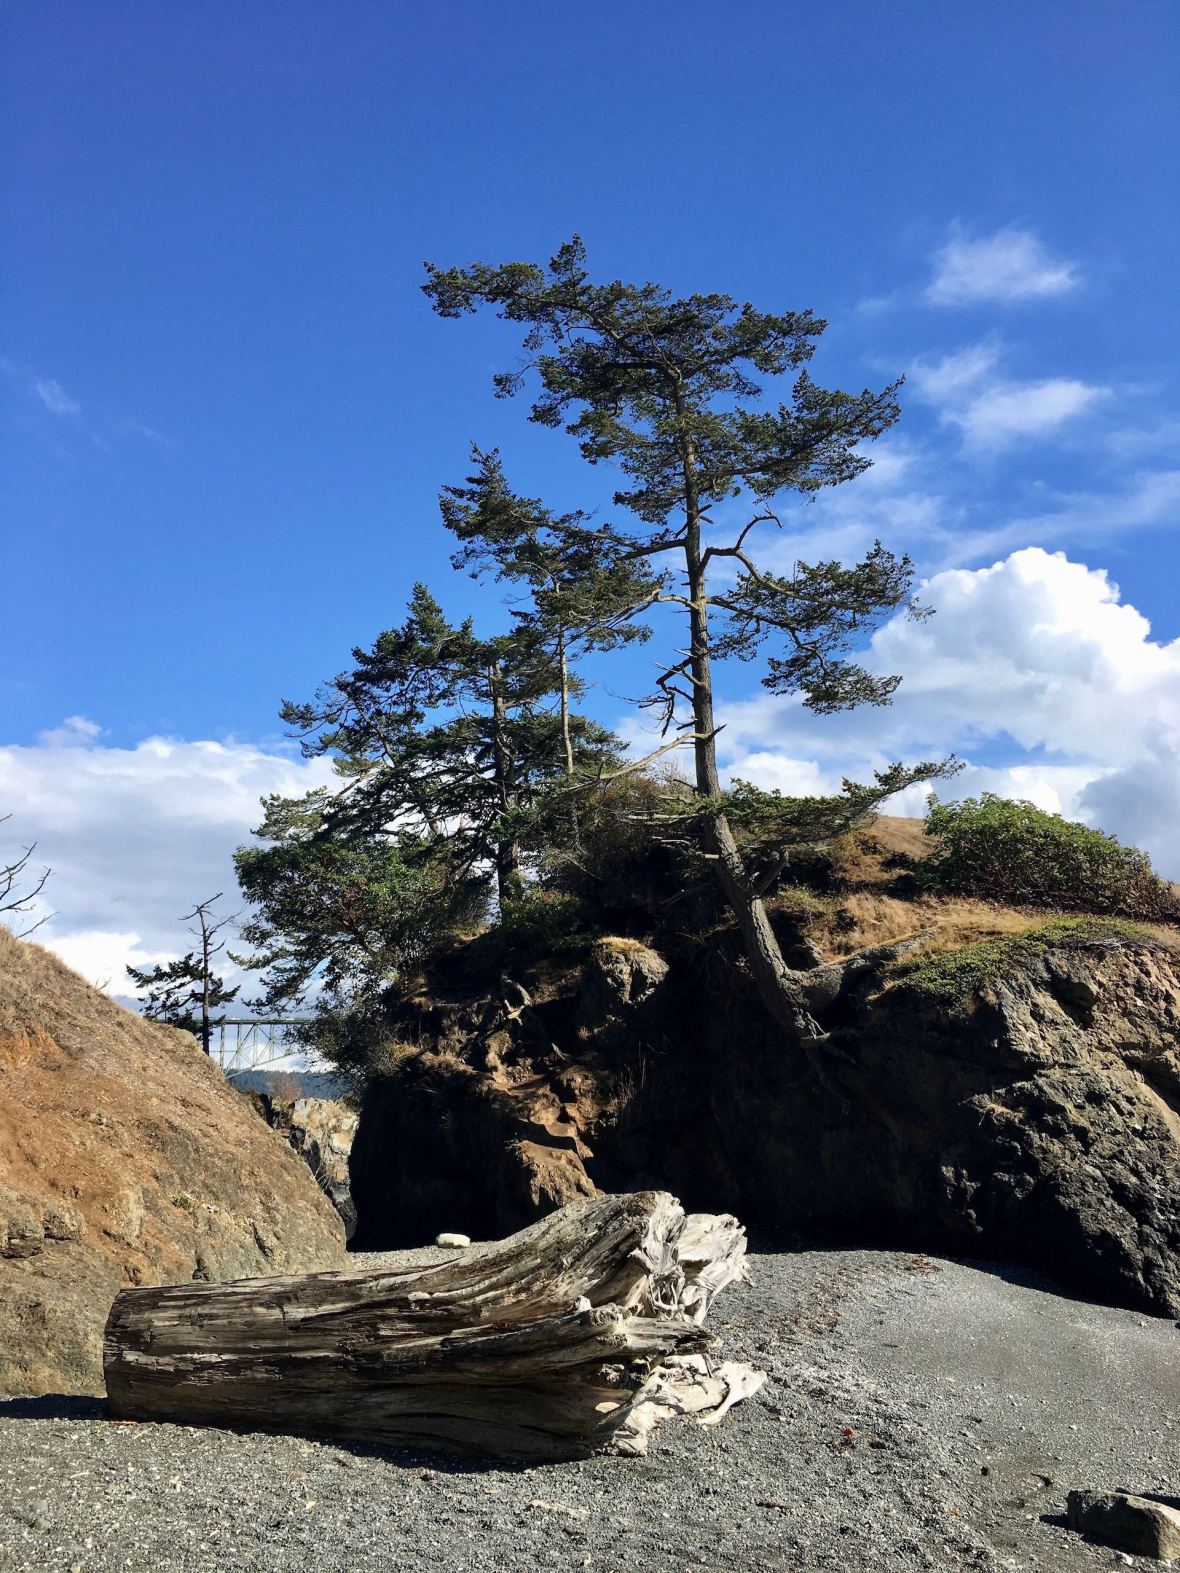 Steller views from atop this rock in Deception Pass State Park